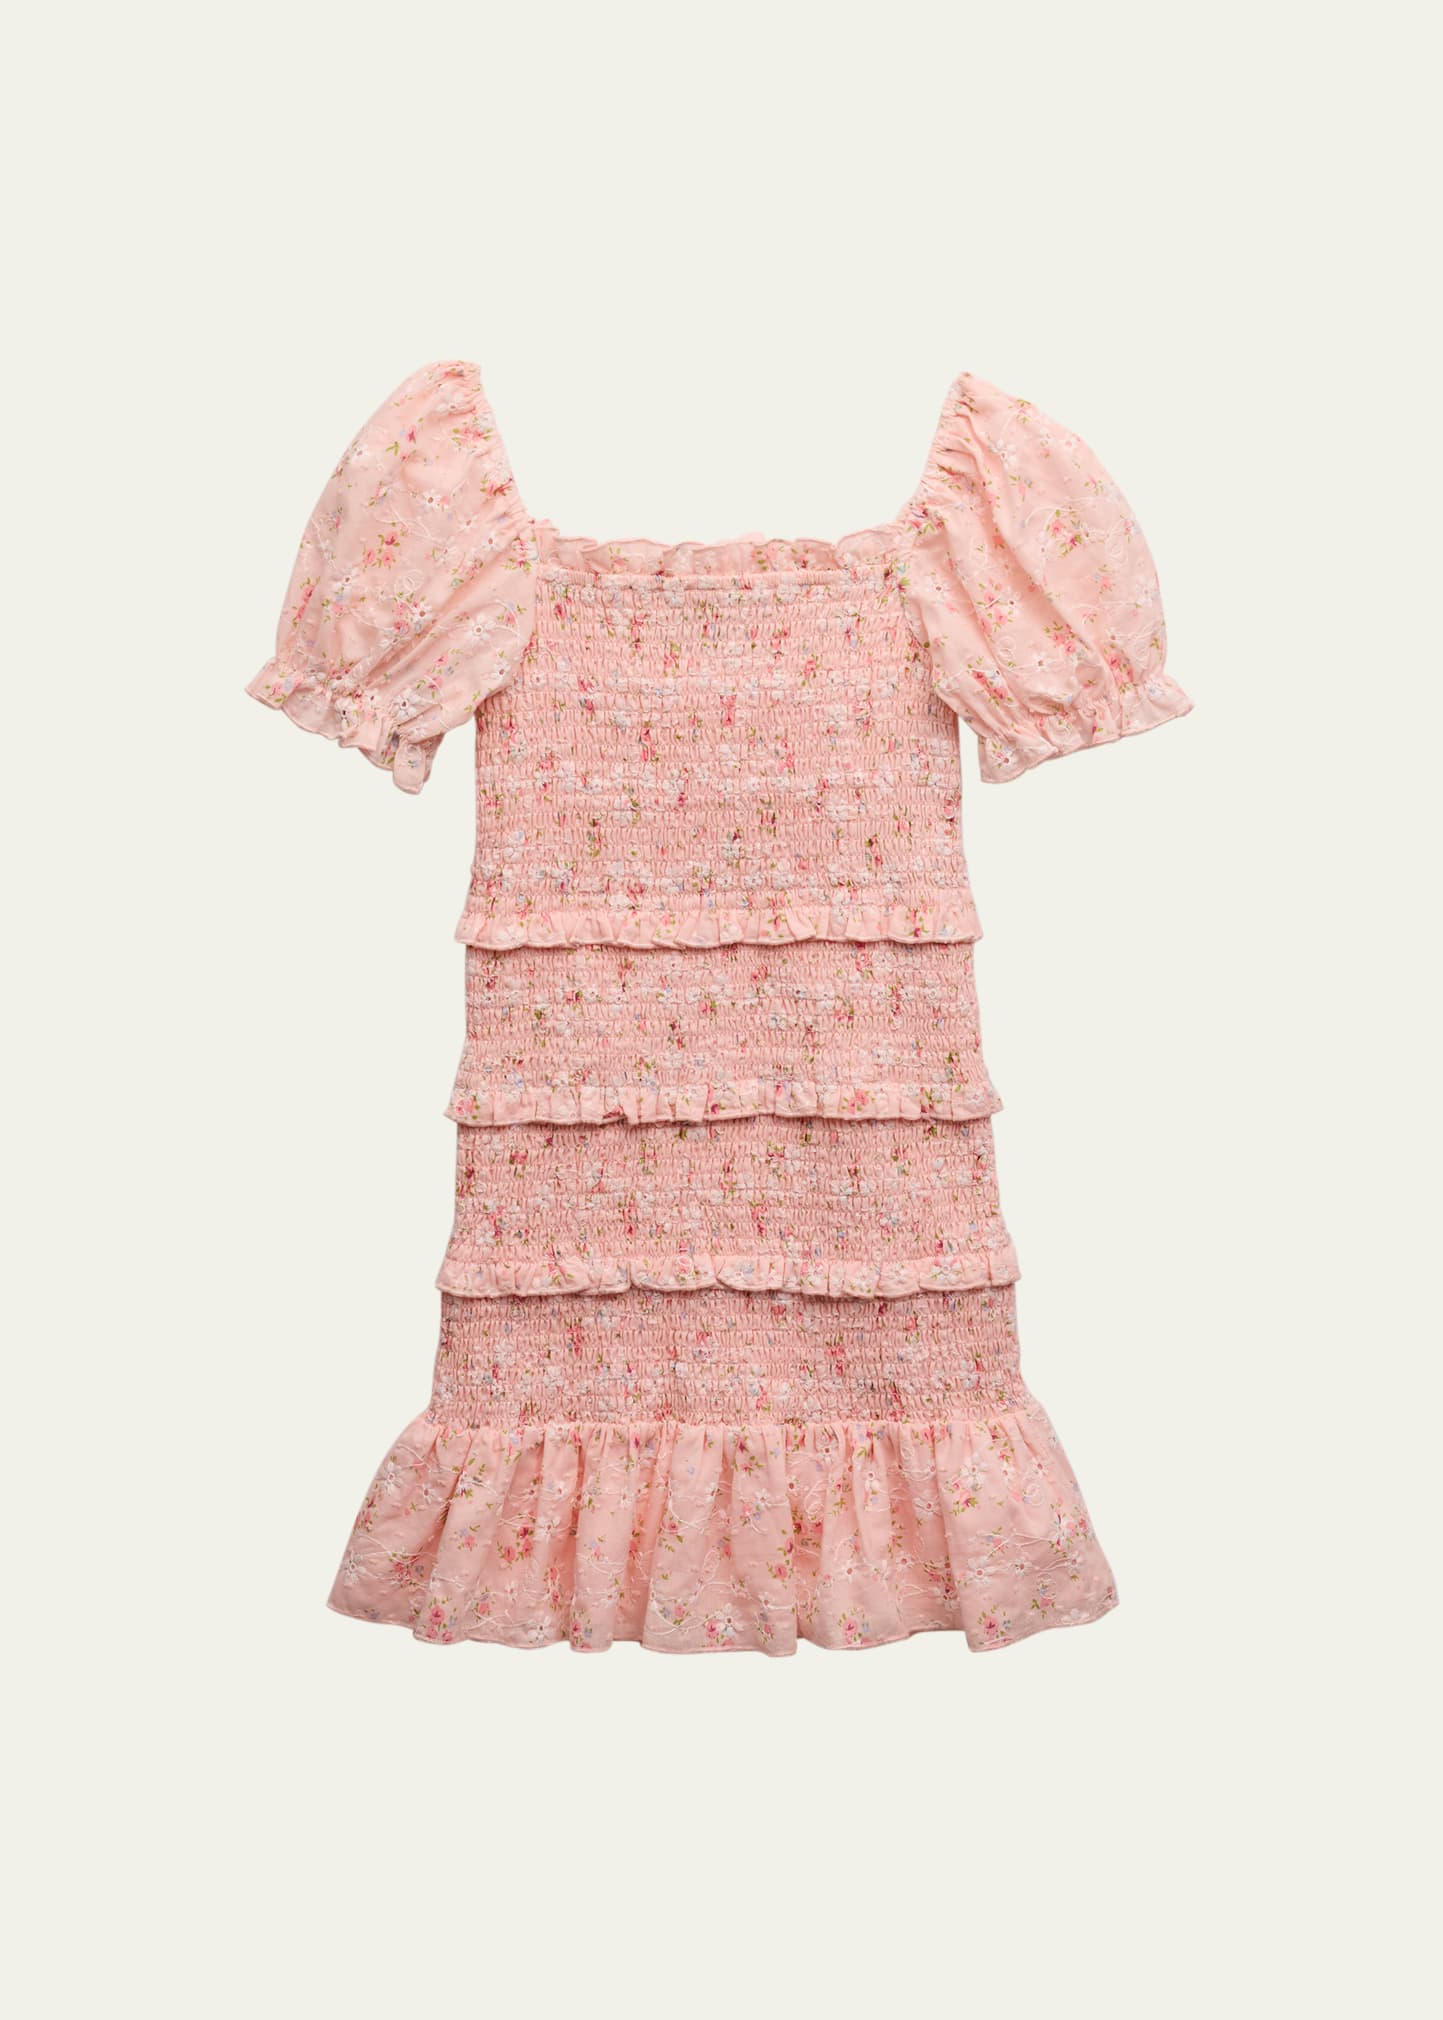 Katiej Nyc Kids' Girl's Laila Smocked Floral-print Dress In Sweet Pink Floral